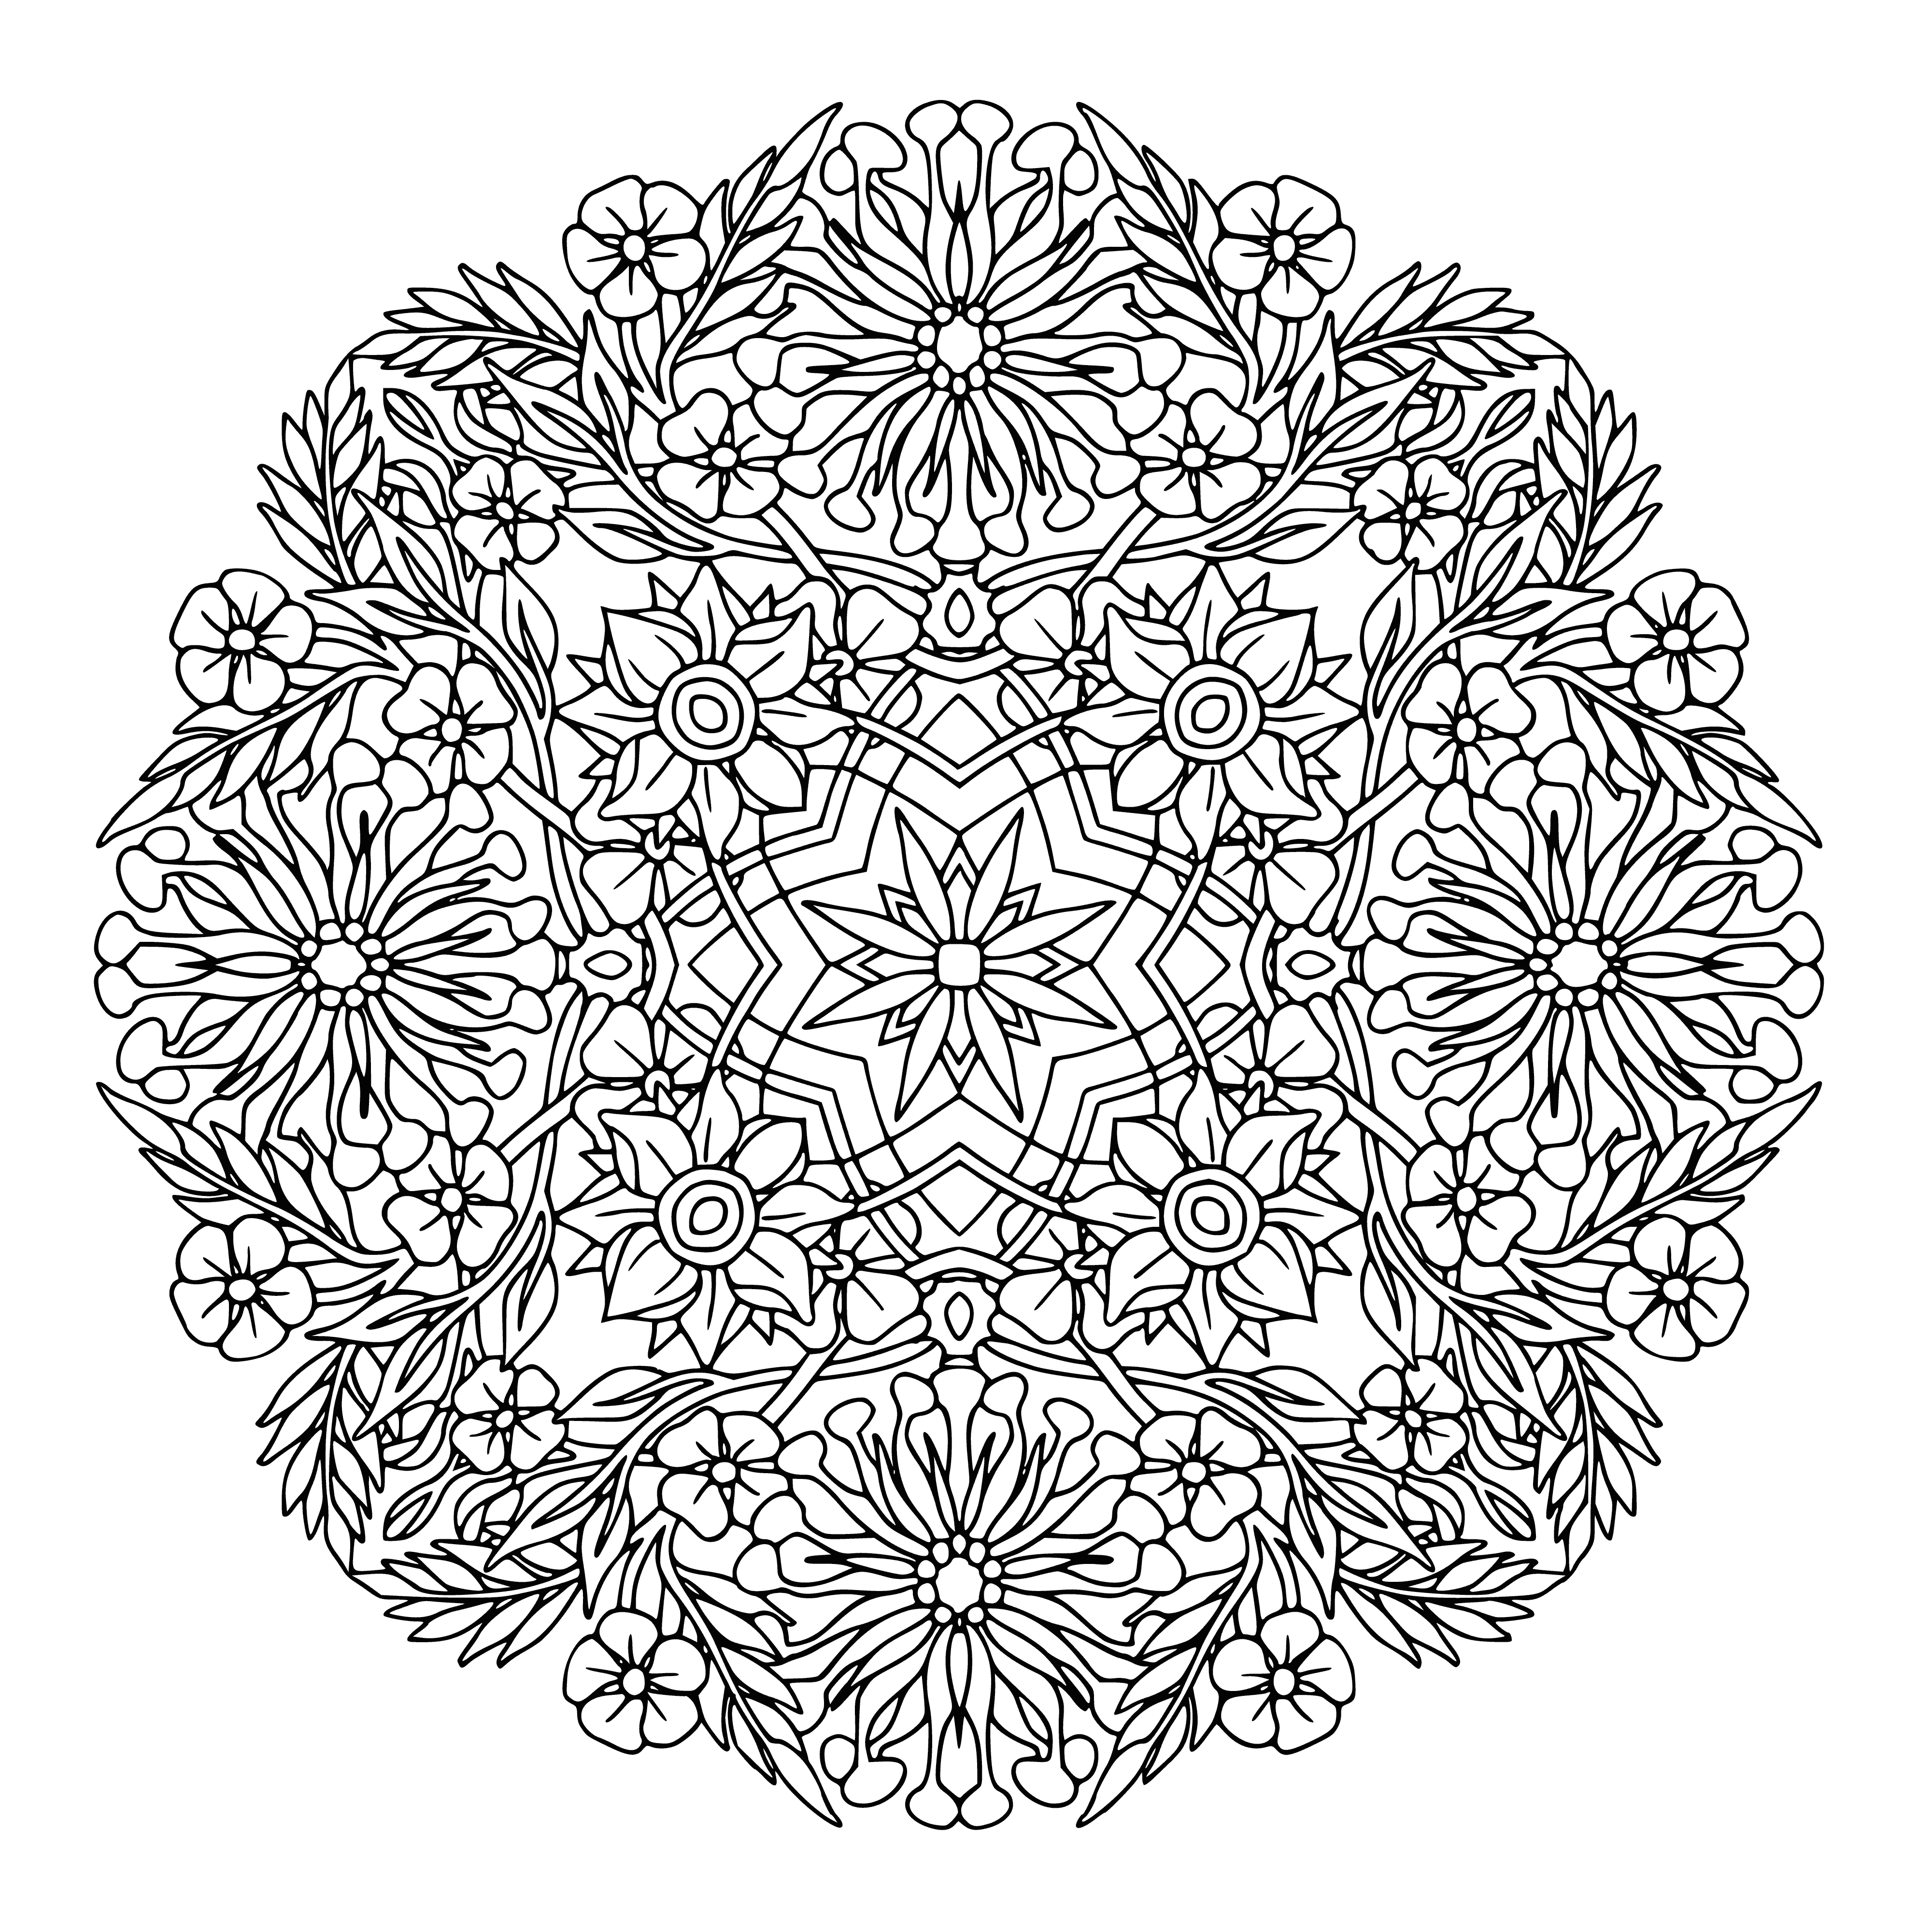 coloring page: Mandala is sacred, circular design used for meditation; center flower petals in various colors, surrounded by circle of flowers.